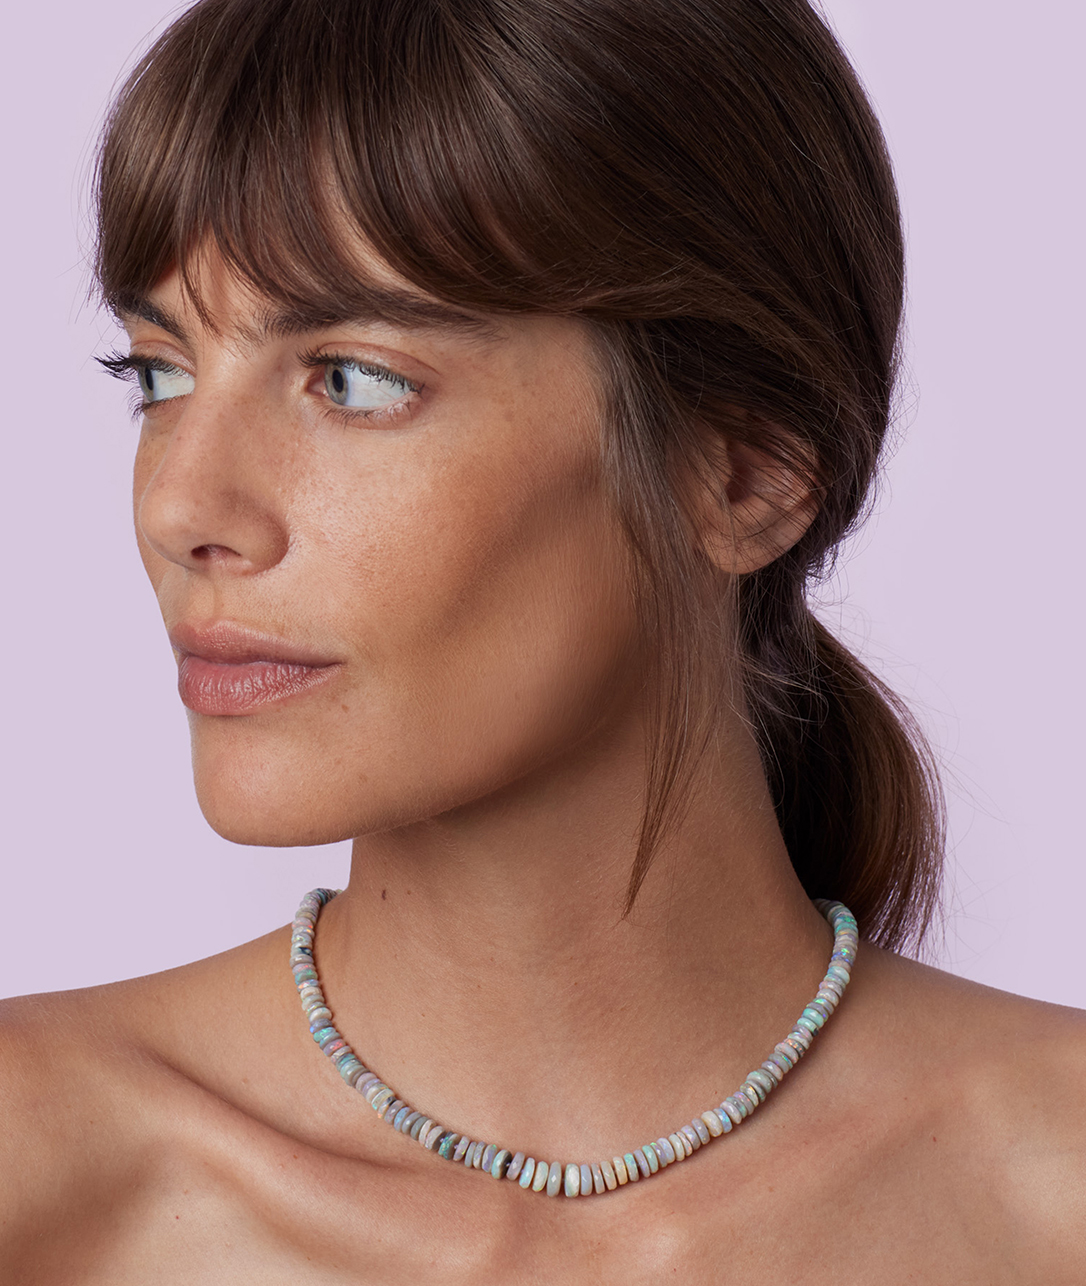 Our Beaded Candy Necklaces are a jewelry box essential for the opal lover.SHOP OPAL BEADED CANDY NECKLACES